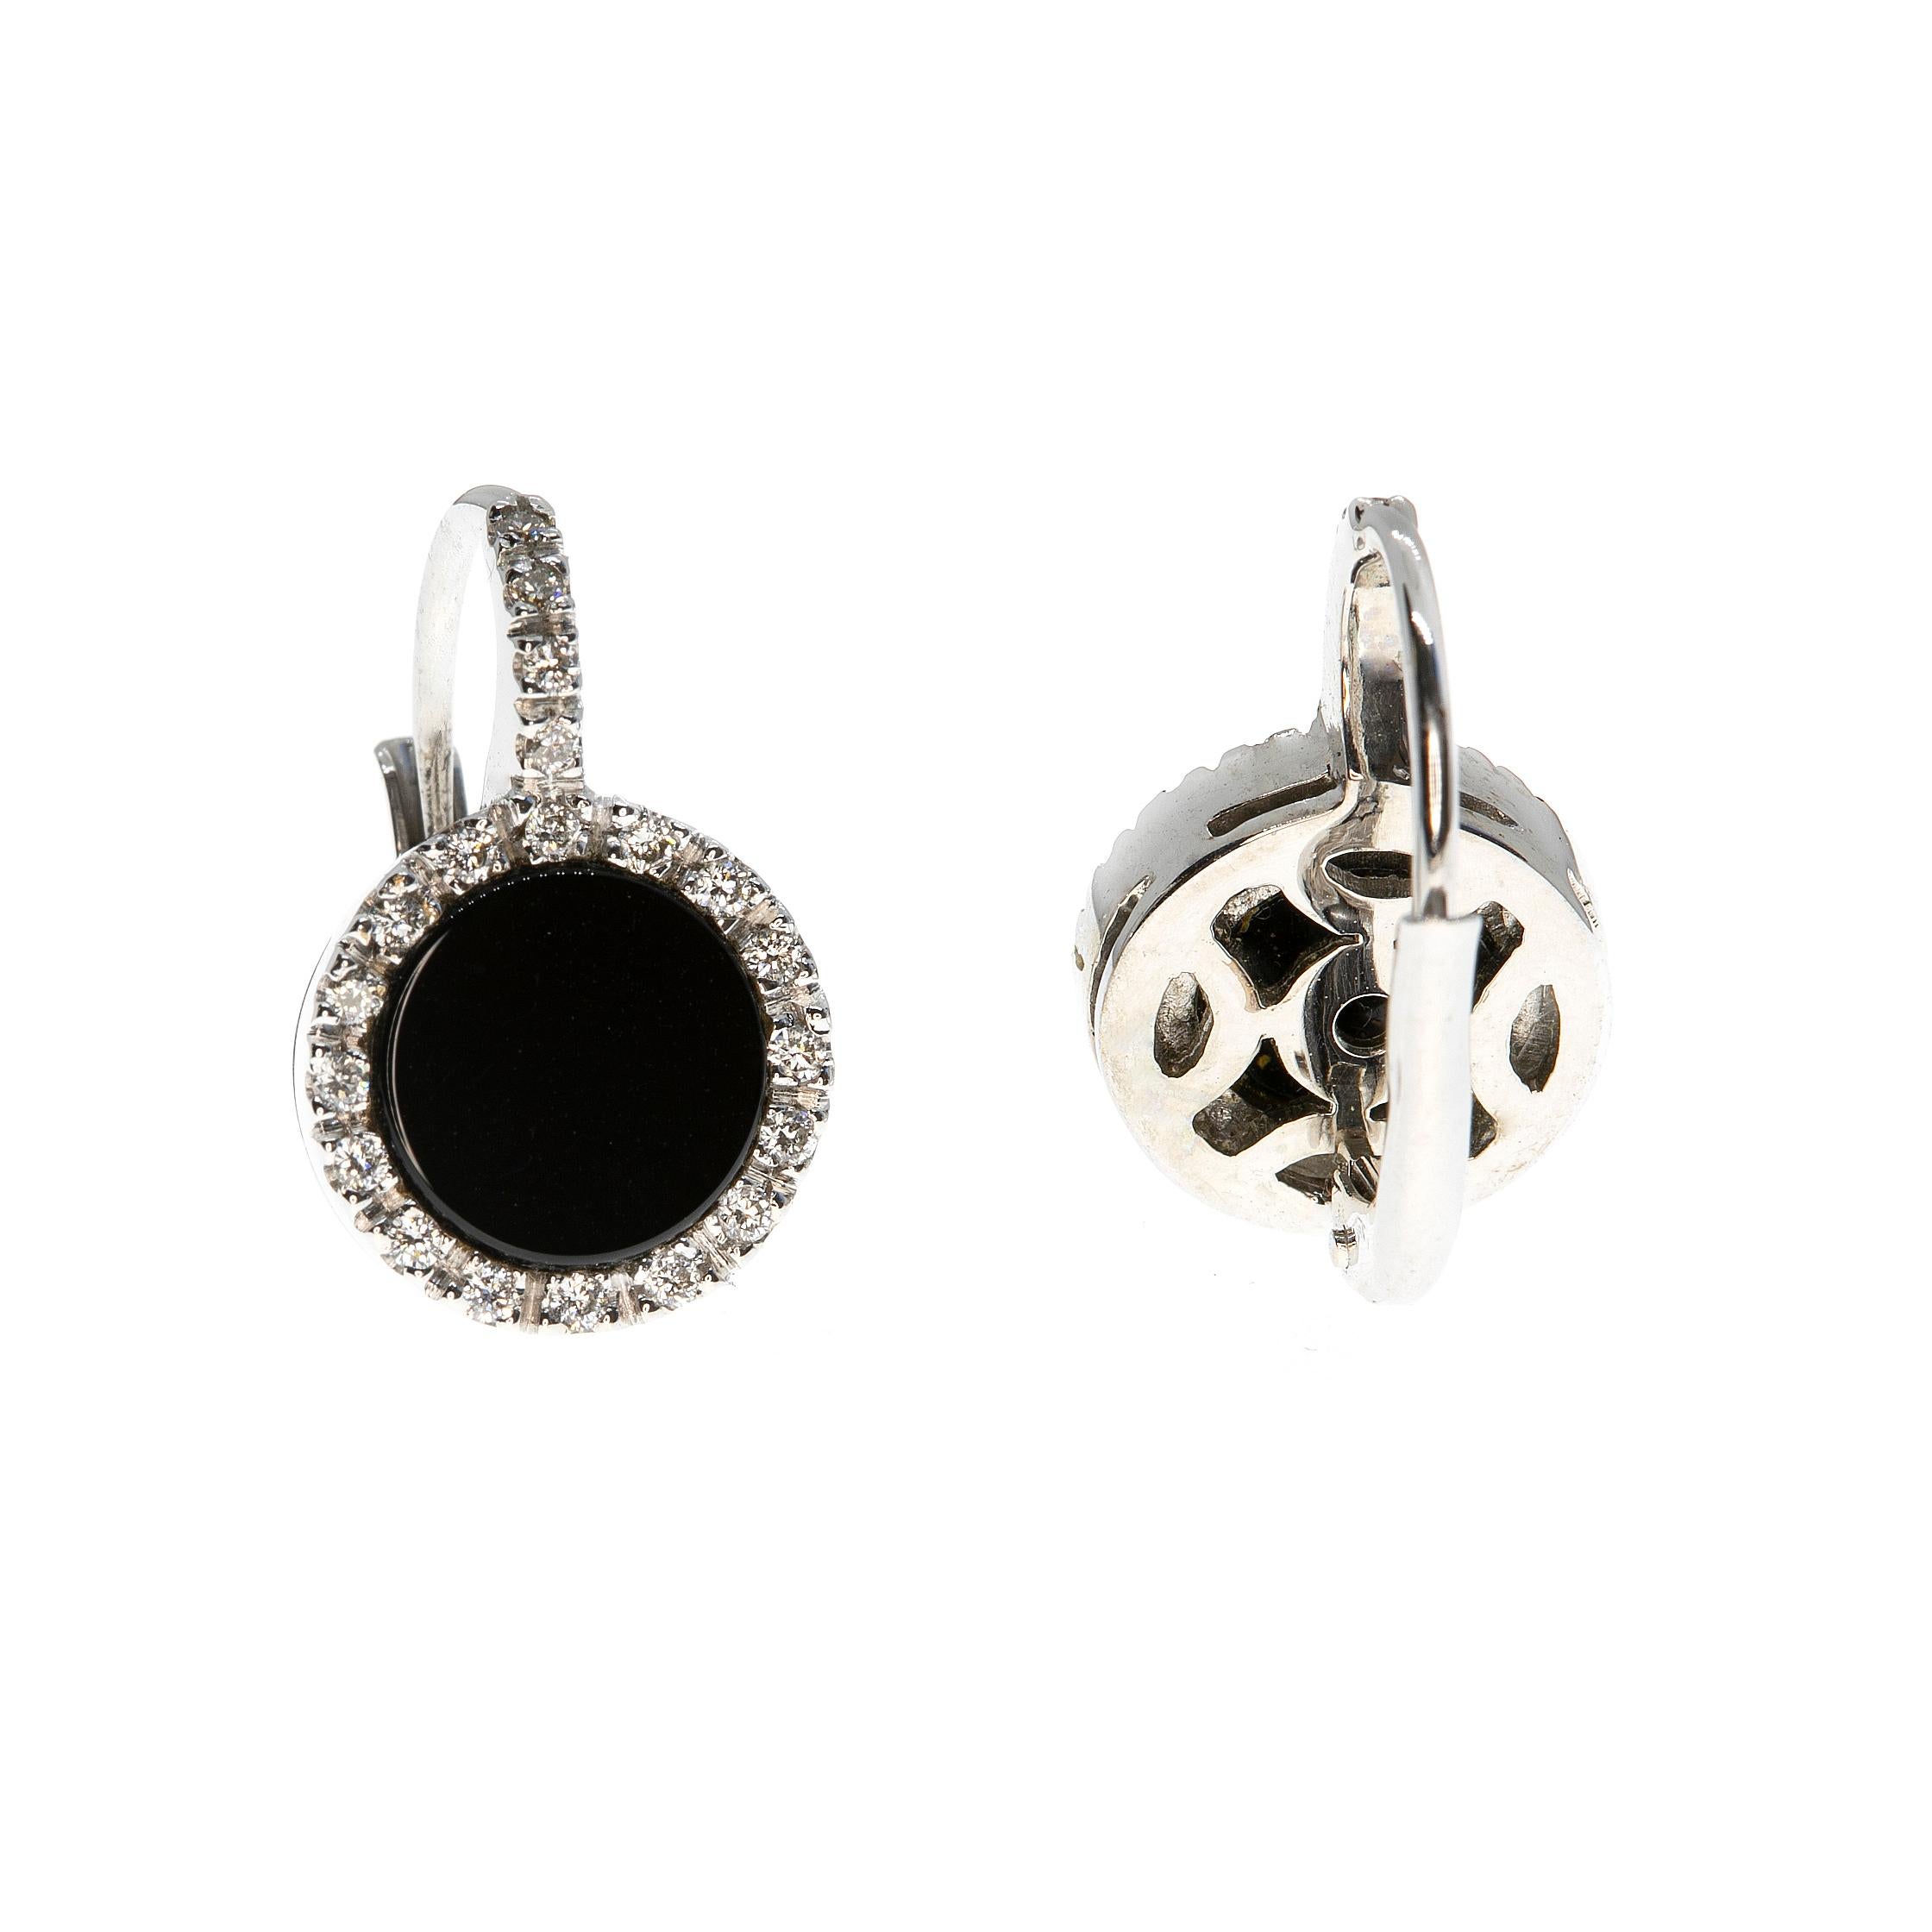 These earrings, masterfully created by hand from 18-karat white gold are set with a large onyx and a brilliant white diamond halo.

They are exceptional to view and easy to wear with bridge and spring clip backs. They measure just under 17